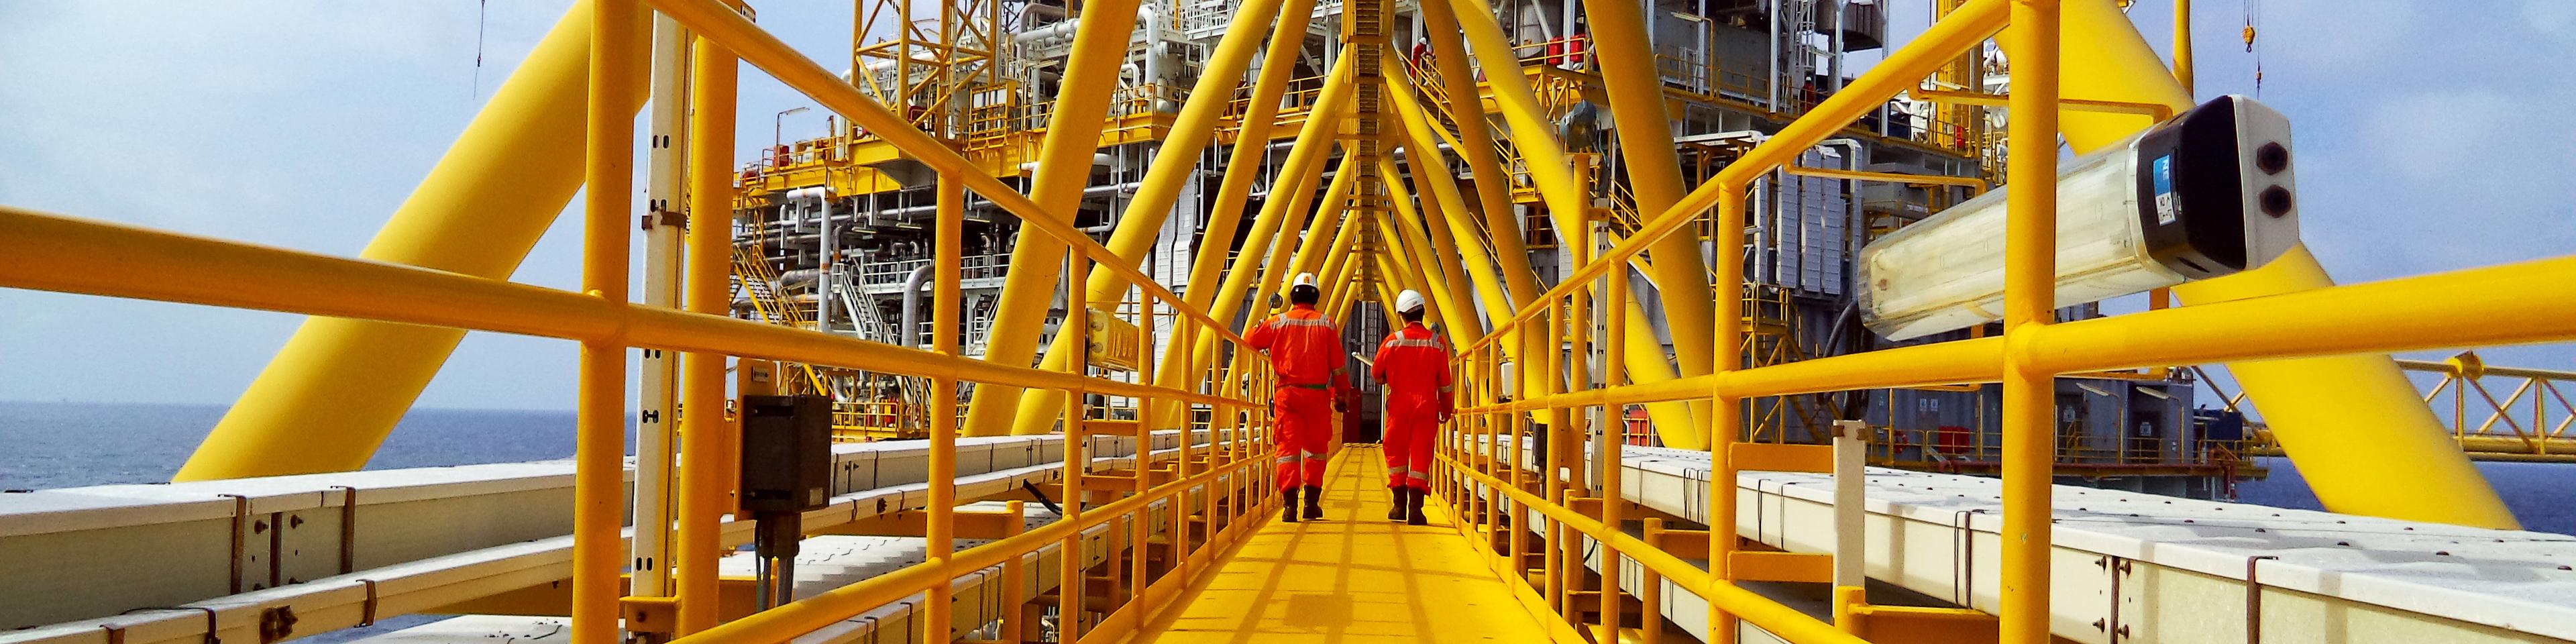 Operator walking operation of oil and gas process at oil and rig plant.